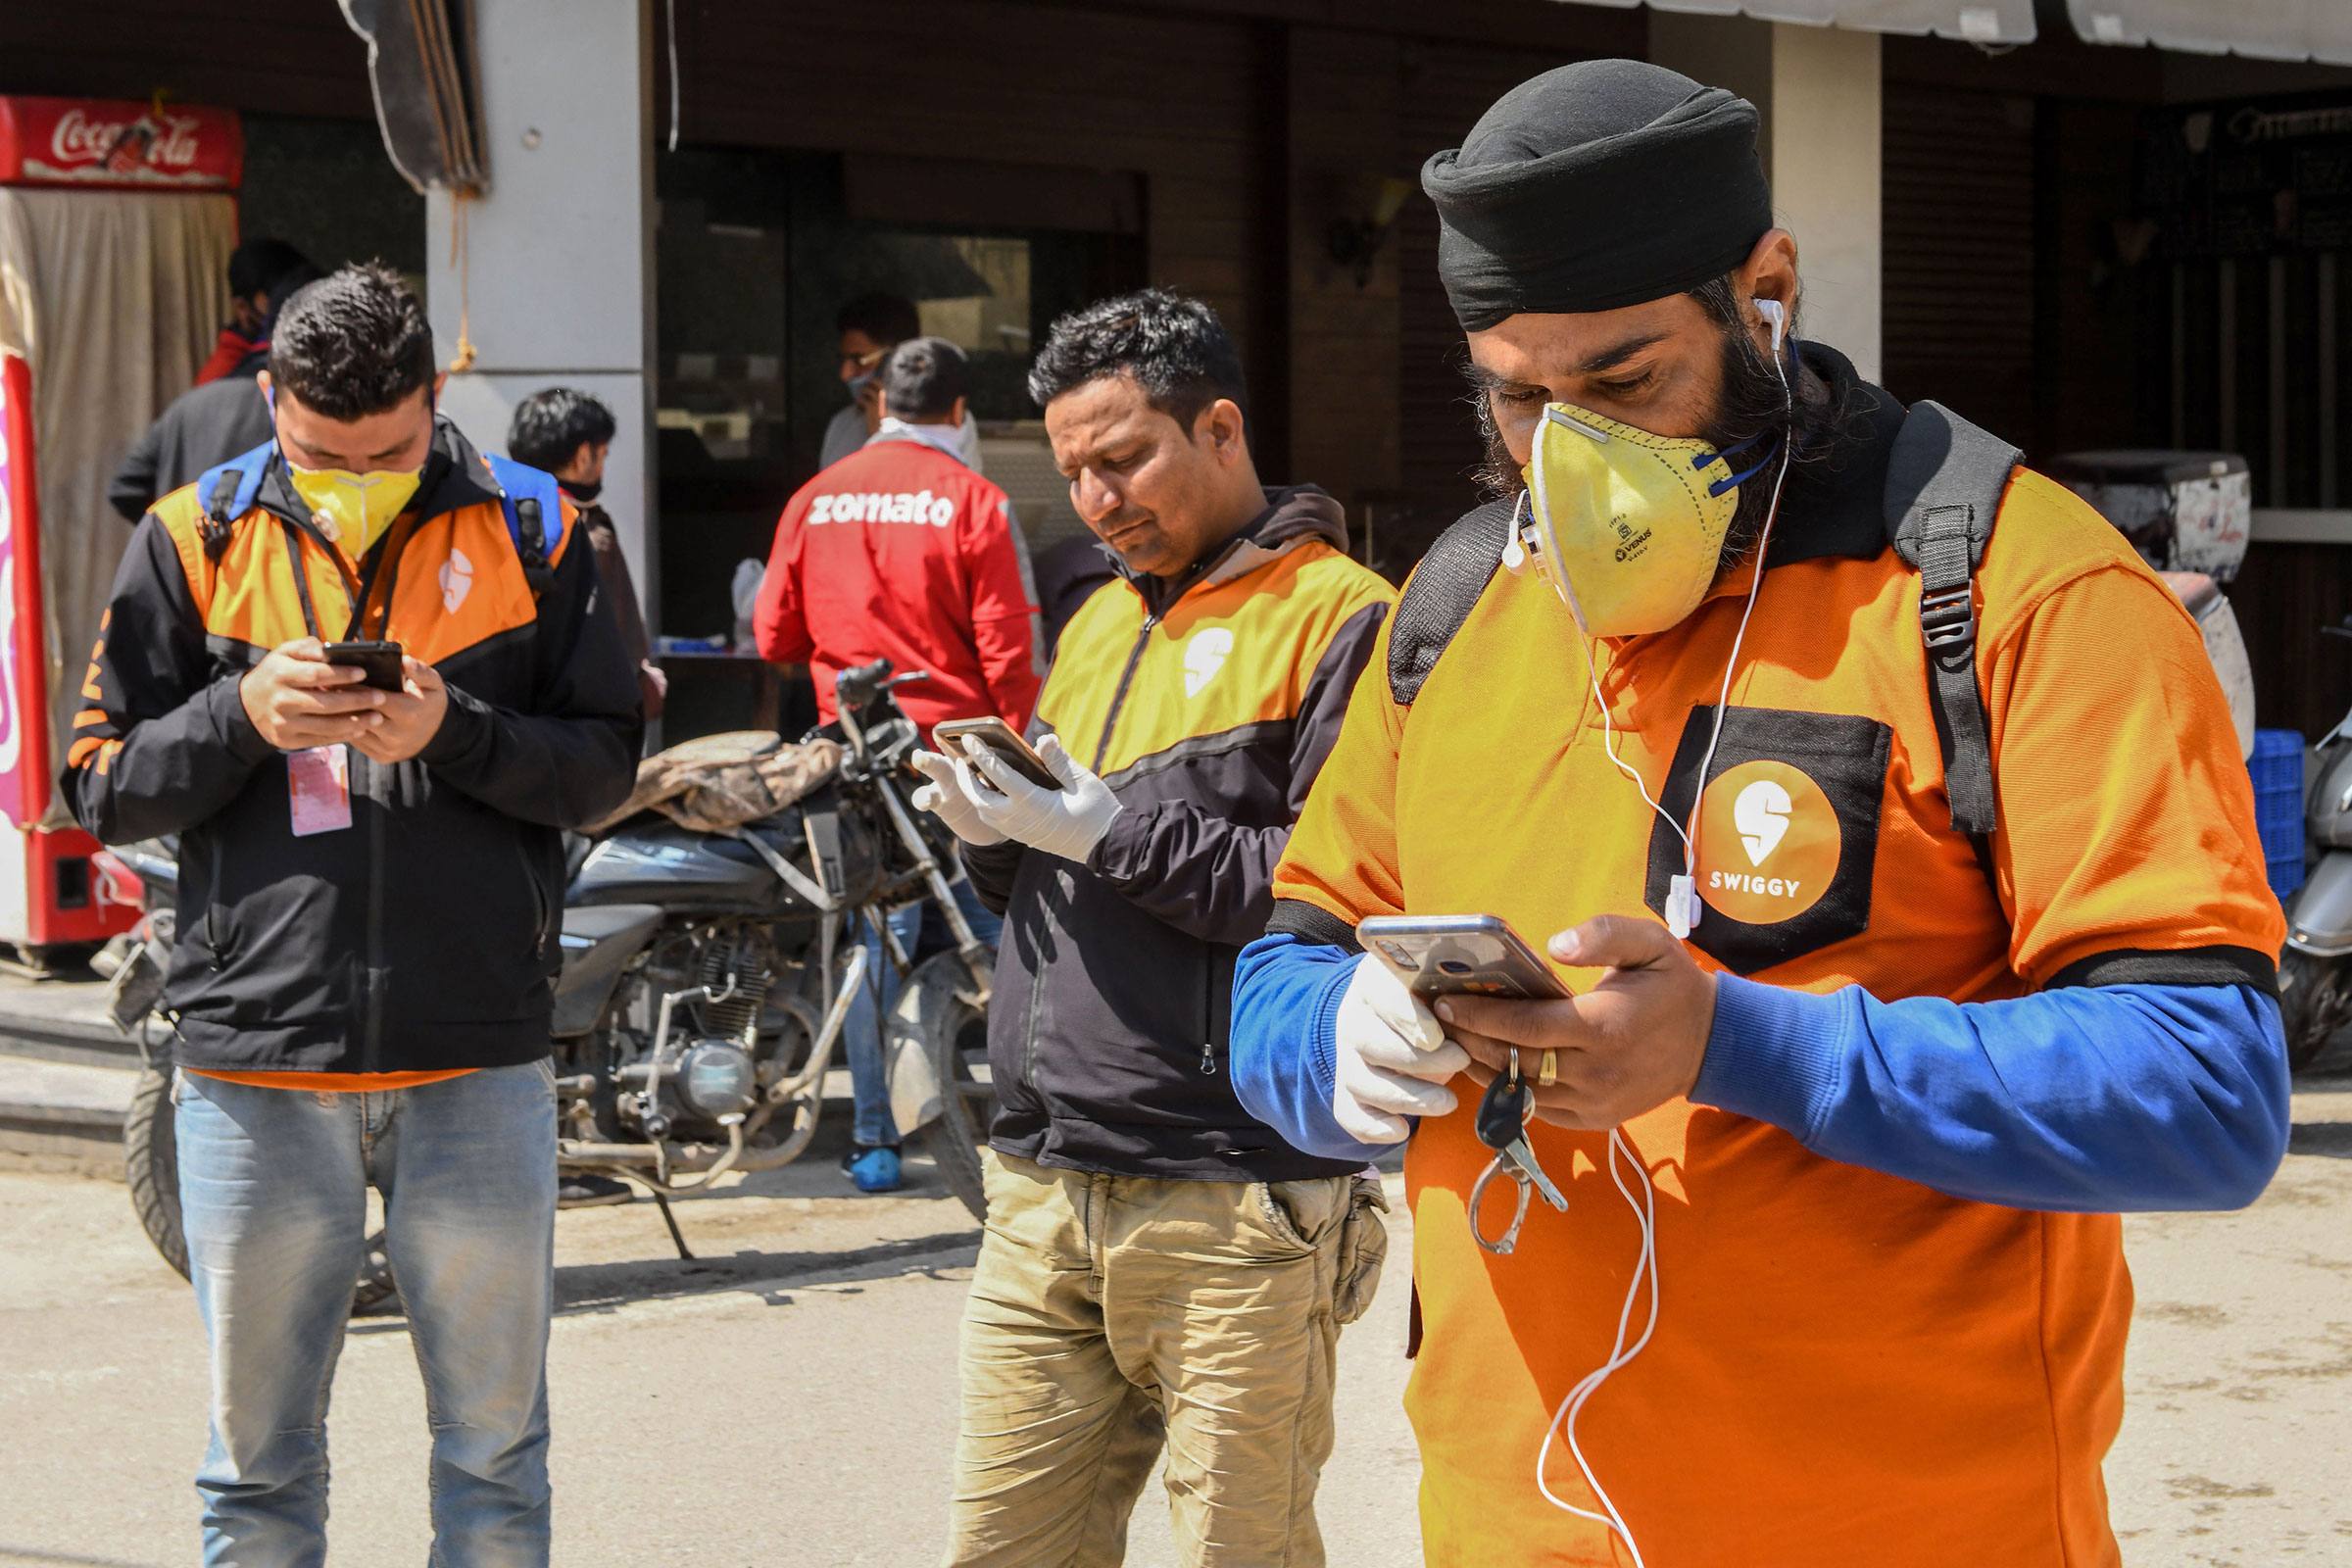 Swiggy delivery workers on mobile phones in Amritsar, India on March 28, 2020. (Narinder Nanu—AFP/Getty Images)